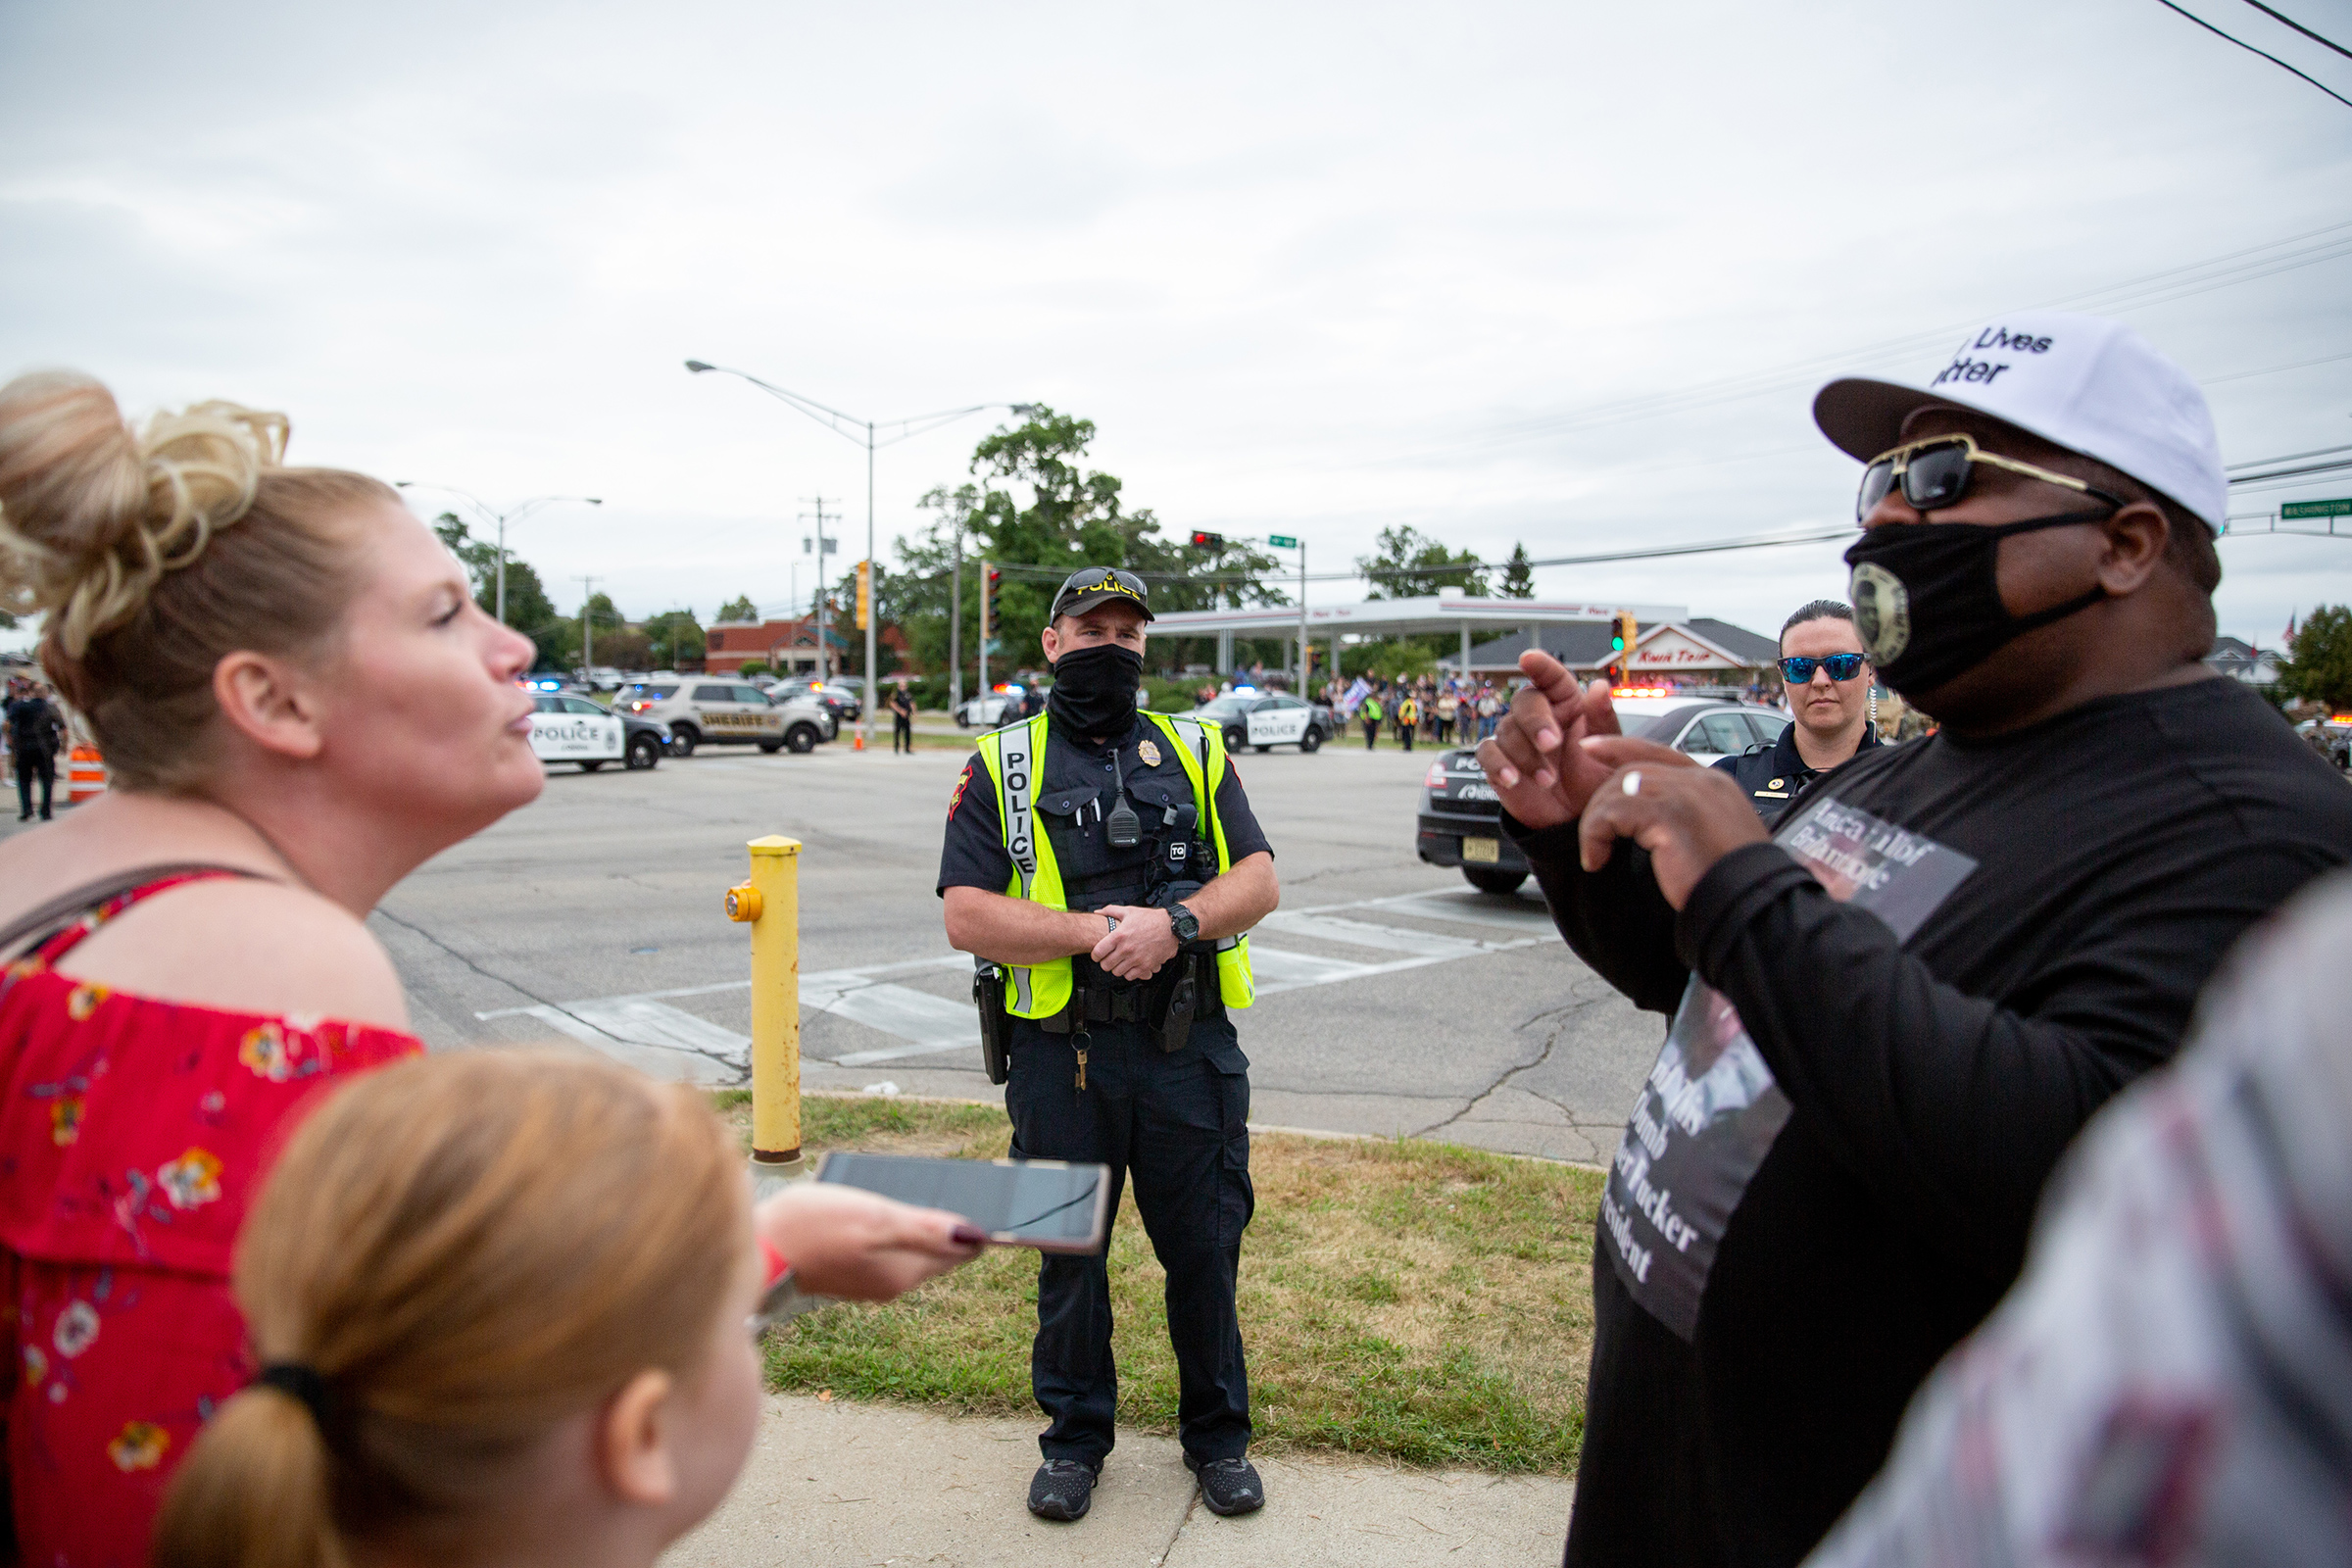 A confrontation during the President’s visit to Kenosha, Wis., on Sept. 1